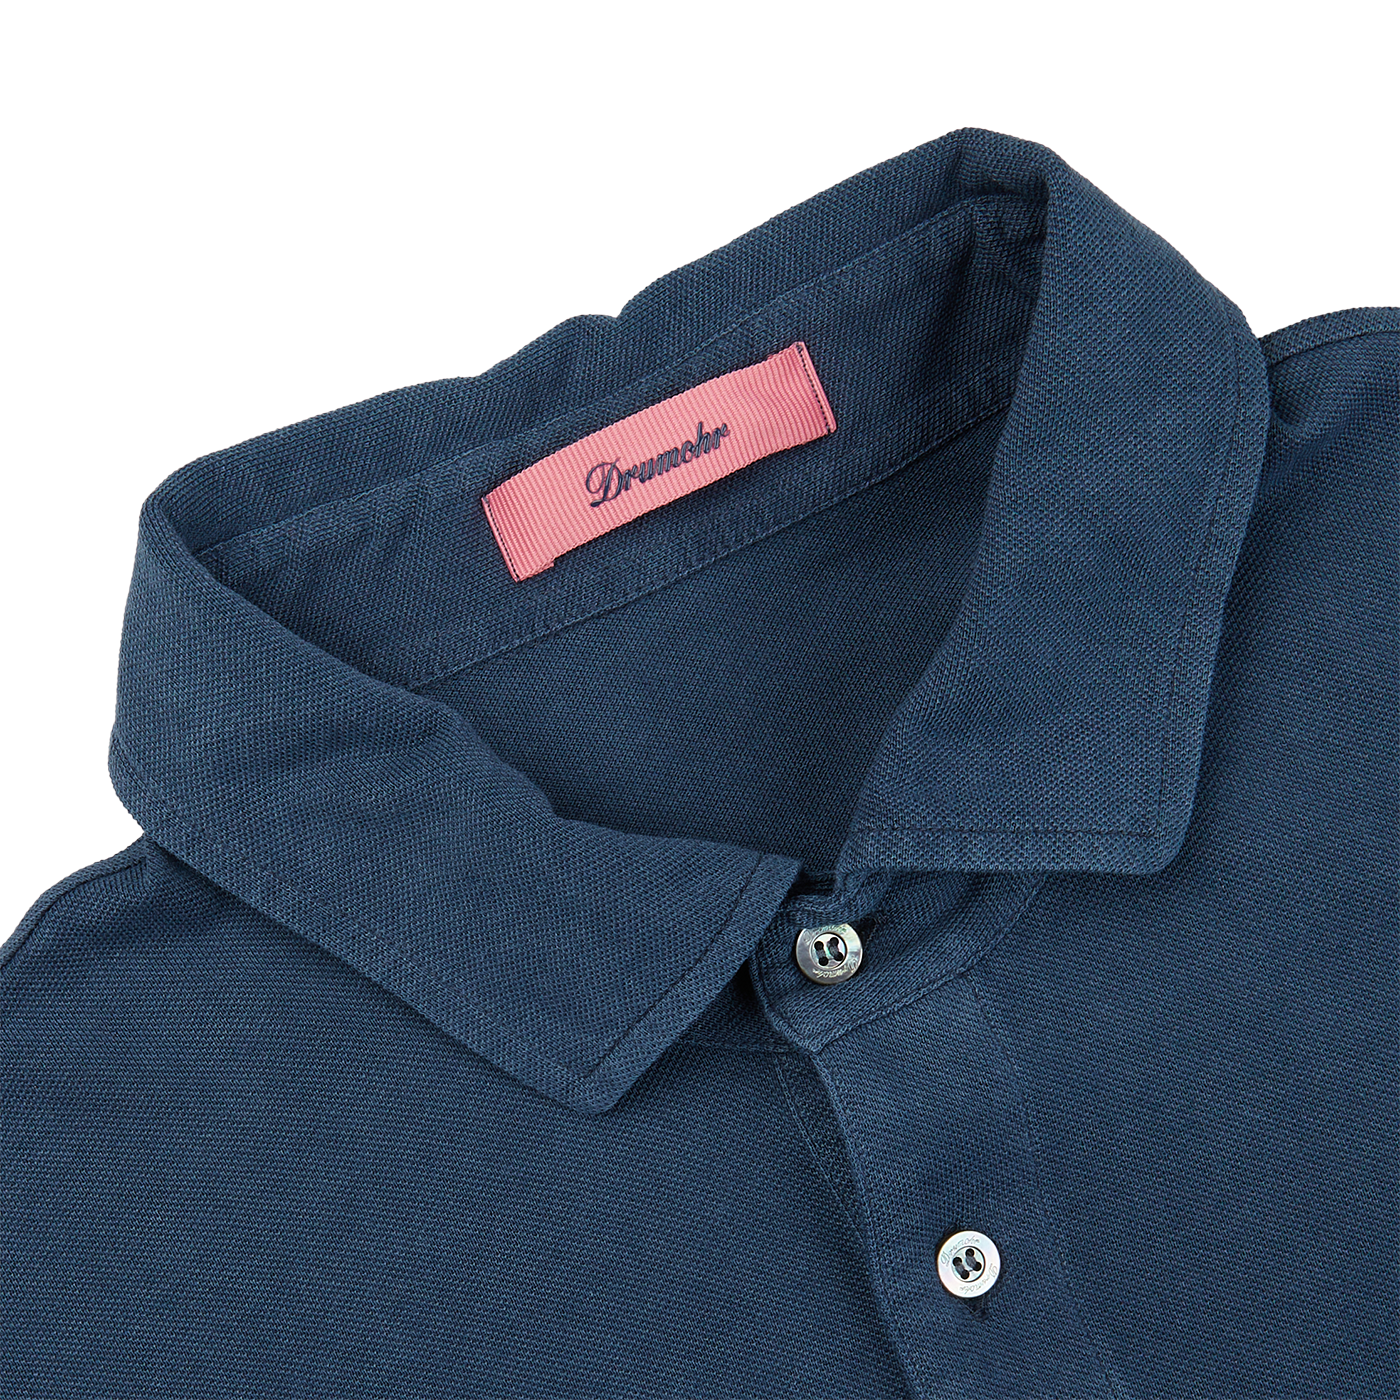 A slim fit medium blue Drumohr cotton piquet LS polo shirt with a pink label on the collar.